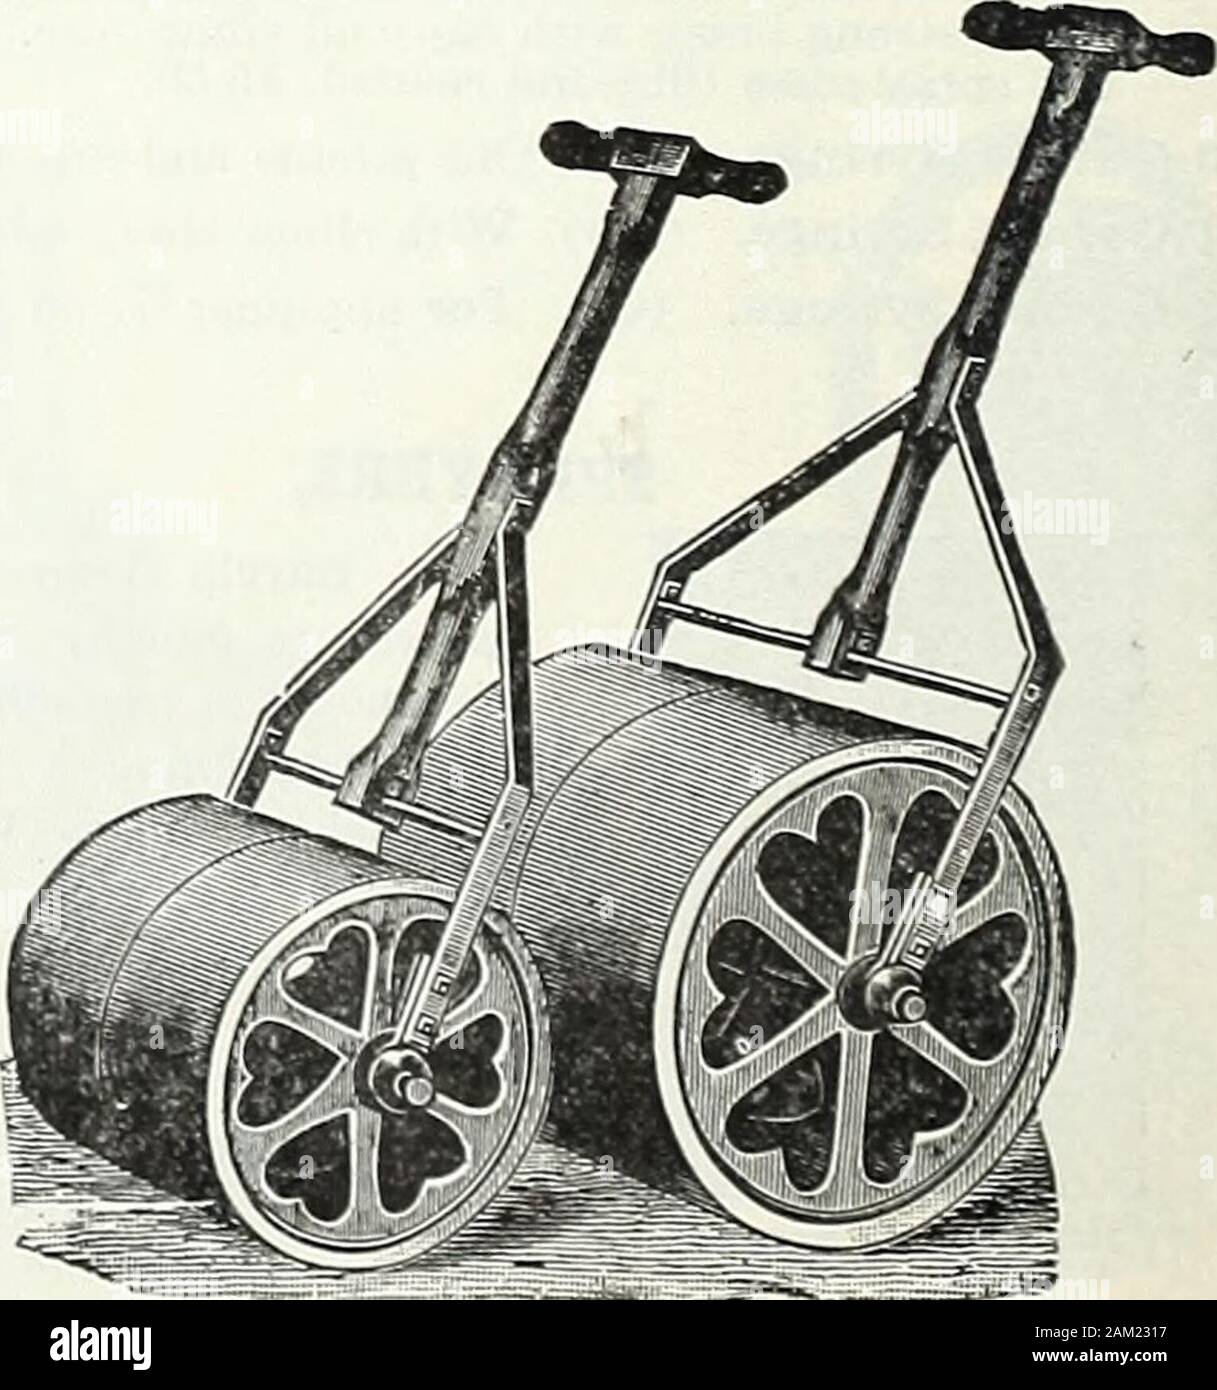 Farquhar's garden annual : 1922 . WATER-WEIGHT LAWNROLLERS. Water-Weight  Lawn Rollers are designed to be filledwith water to any desired weight. The  same roUercan thus be used for soft turf, firm lawns,